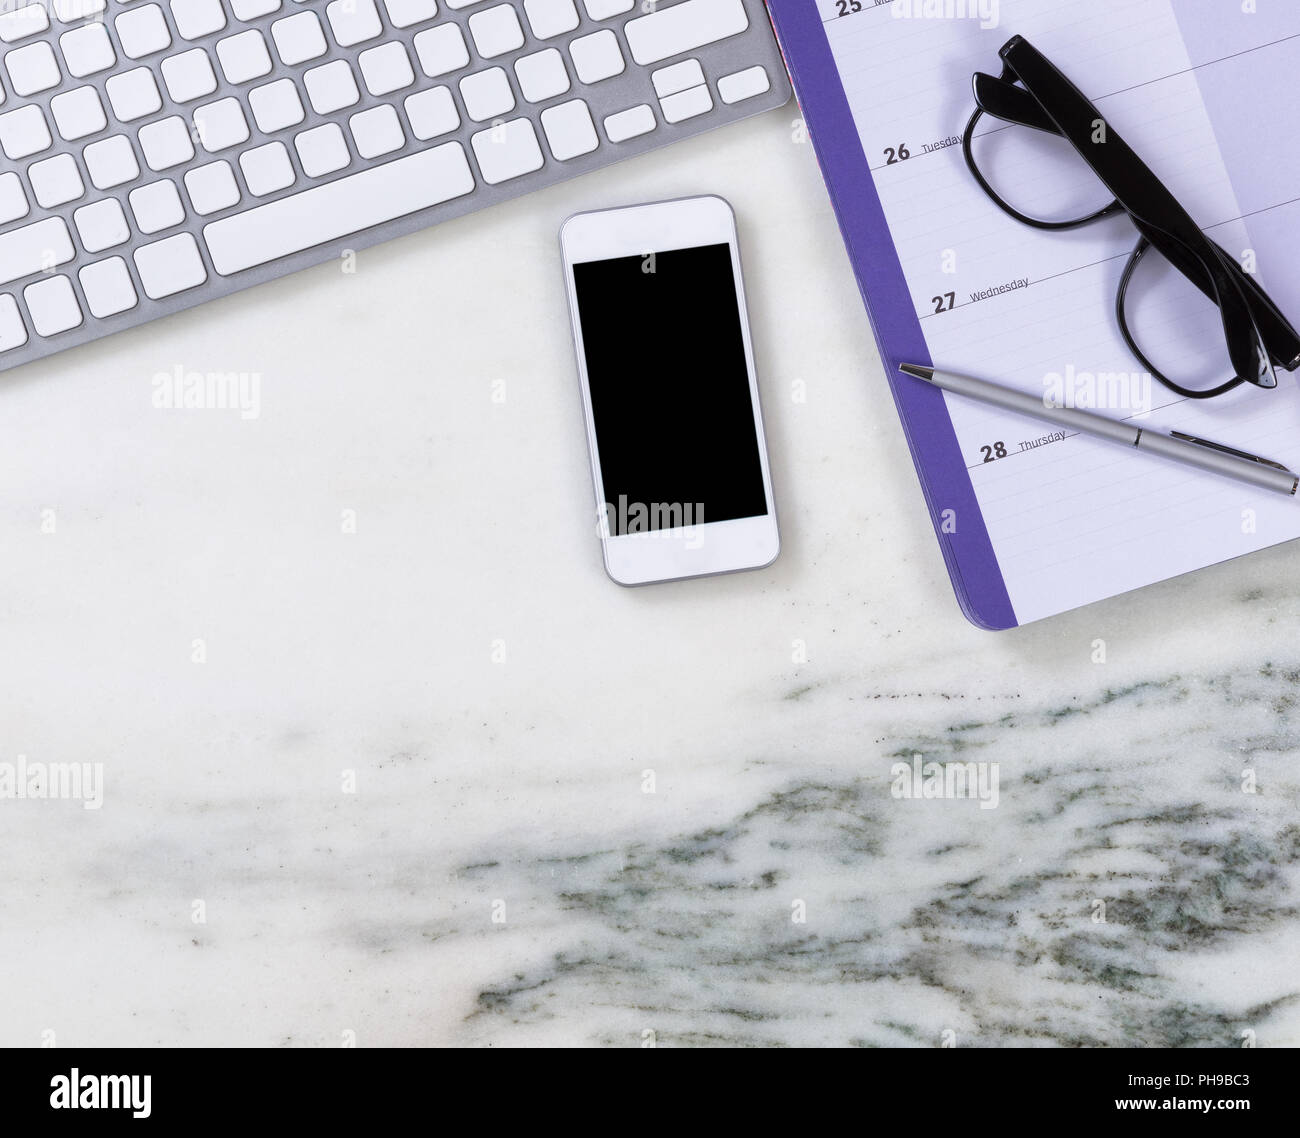 Marble desktop surface with calendar and other office objects Stock Photo